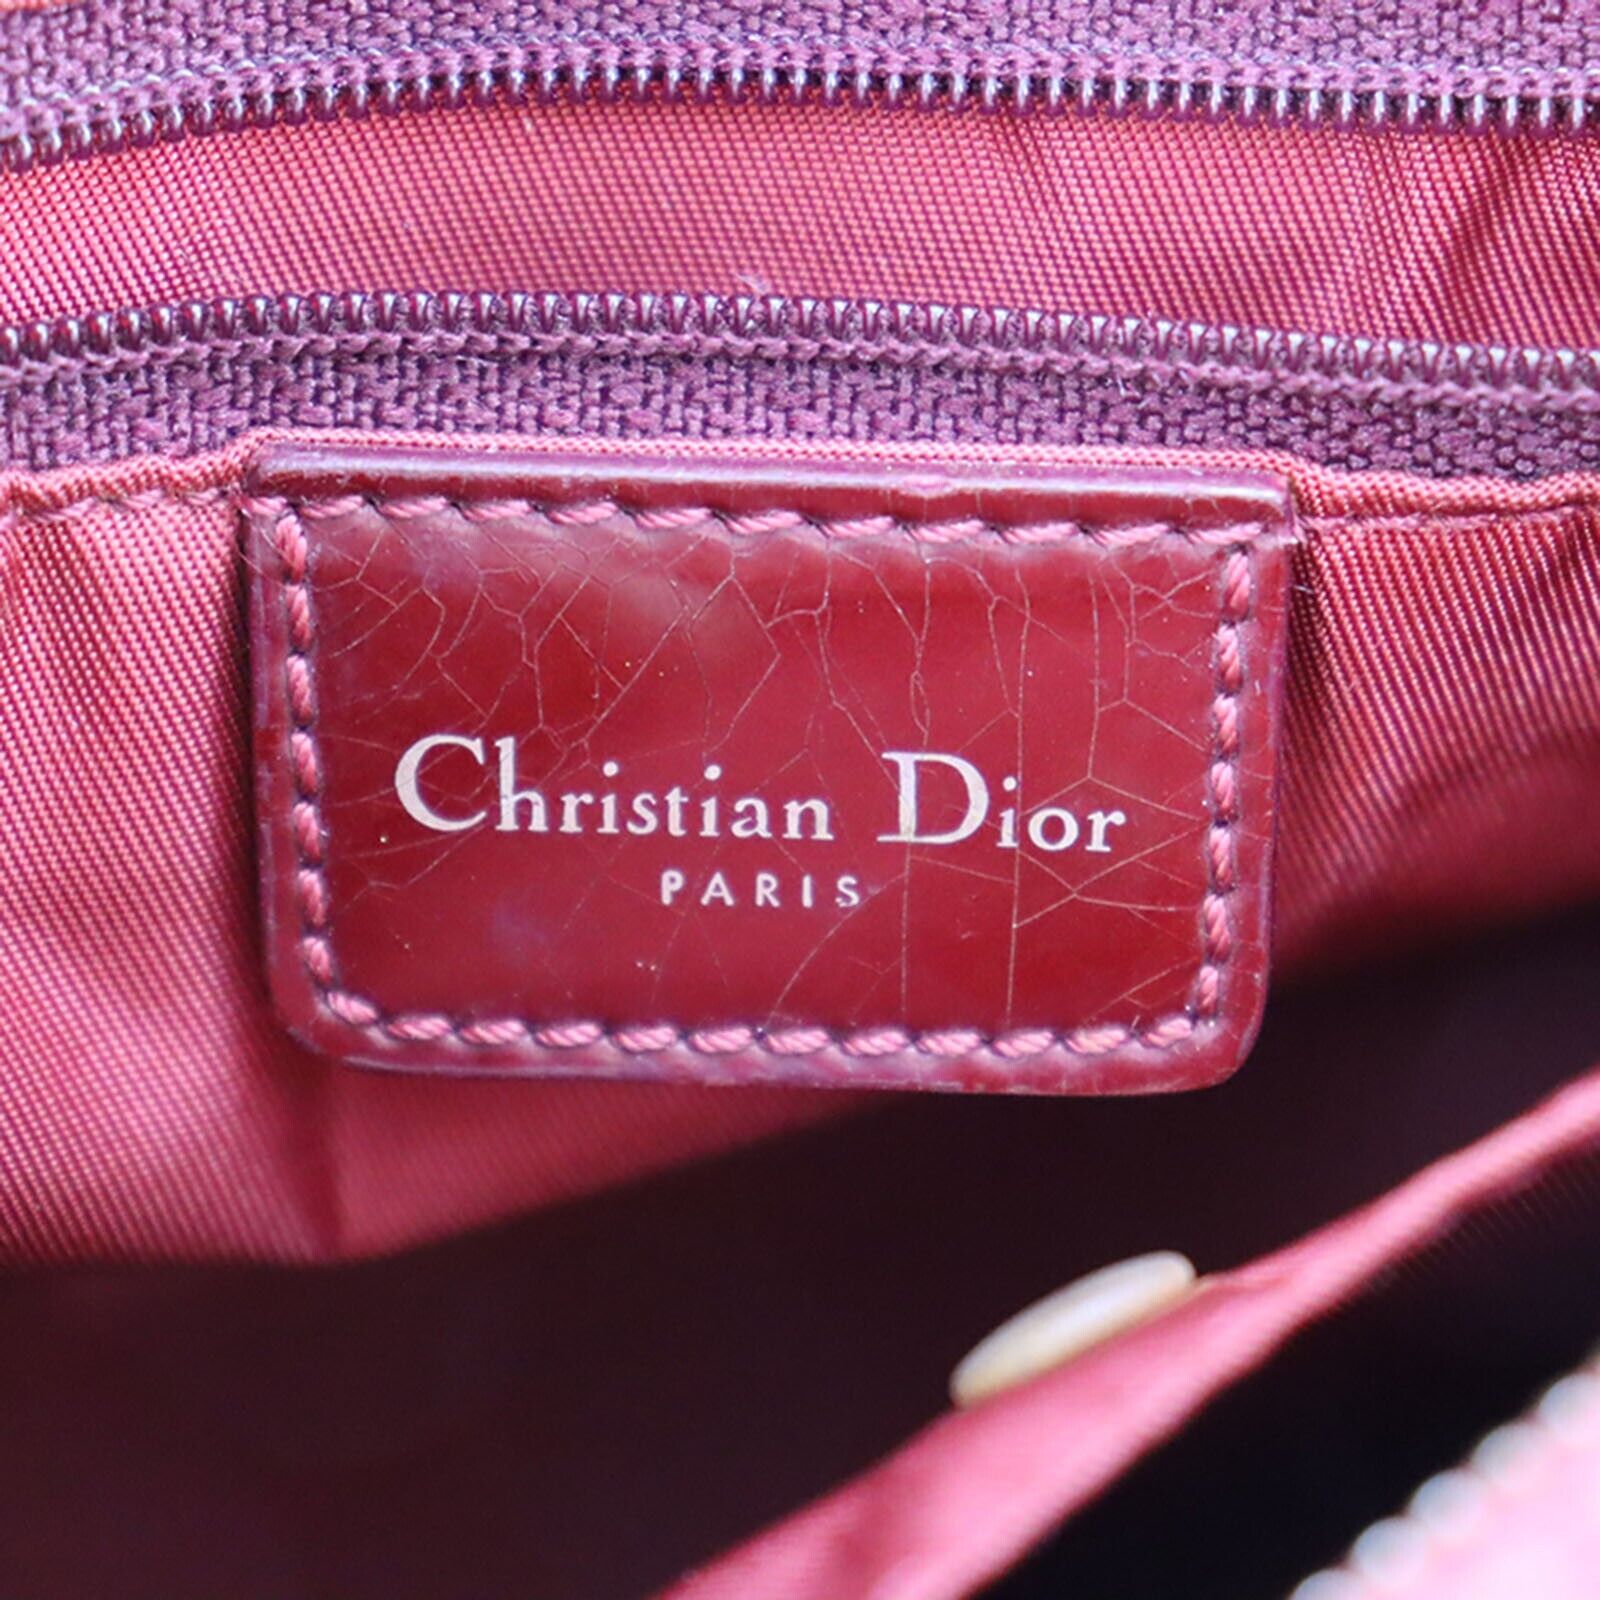 Used Christian Dior Bags